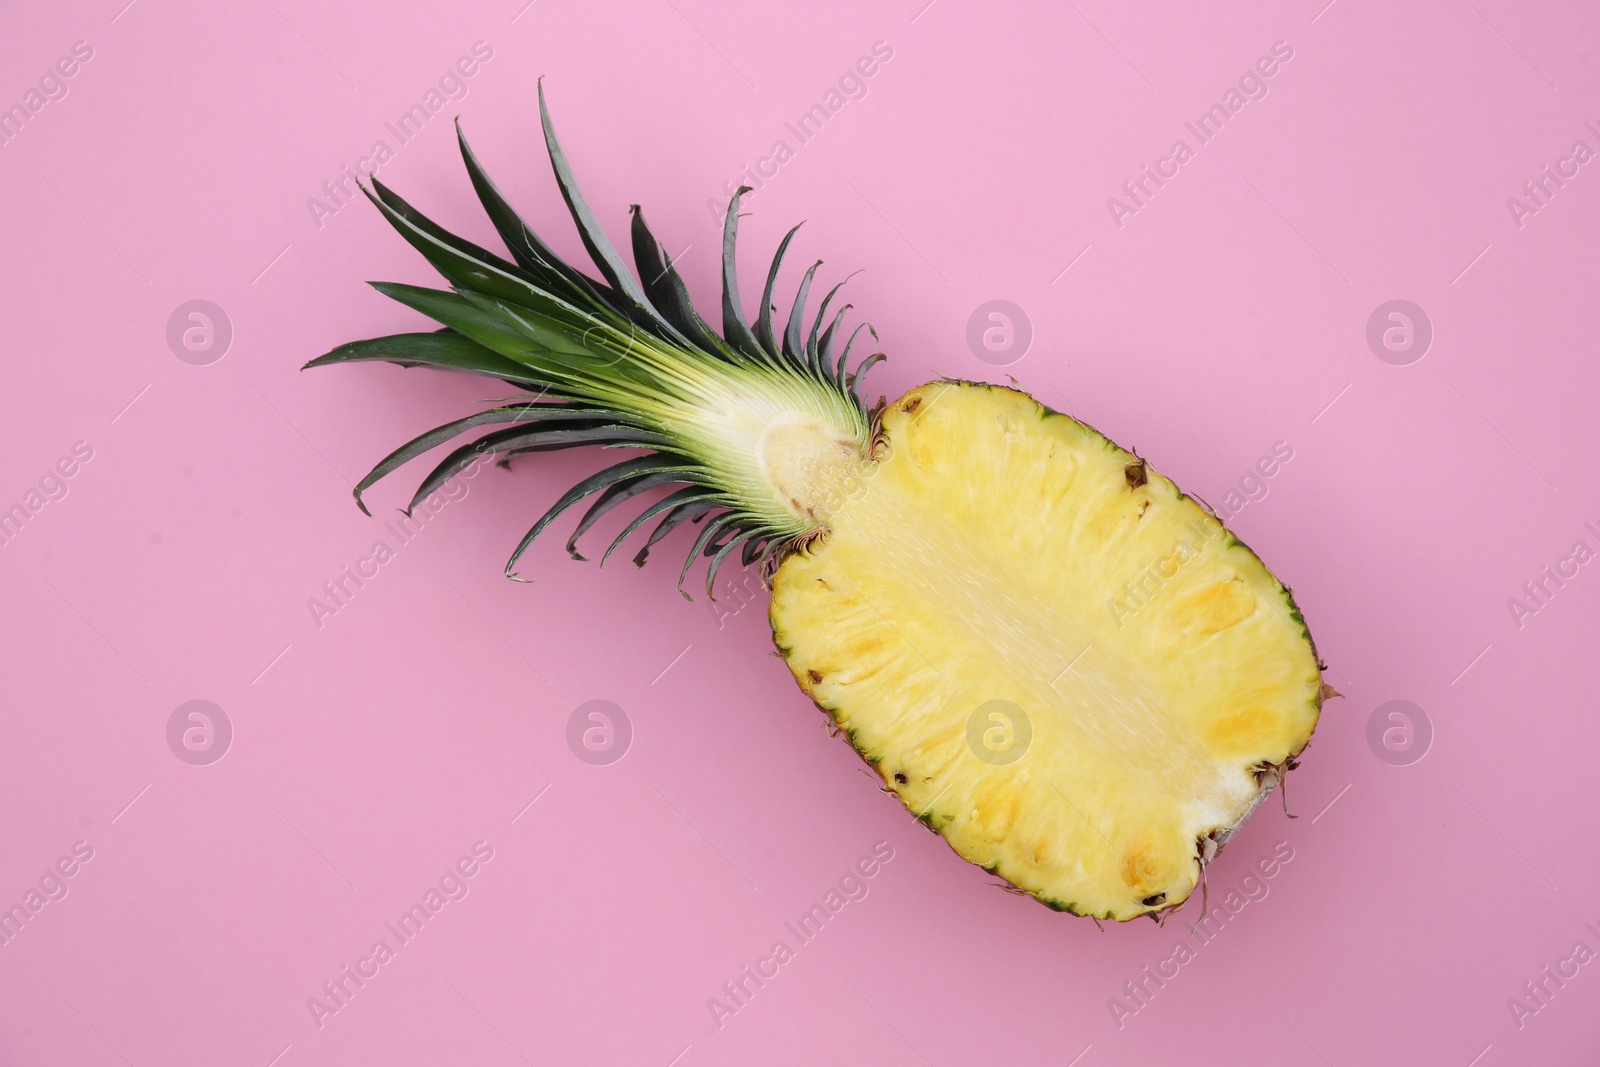 Photo of Half of ripe pineapple on pink background, top view